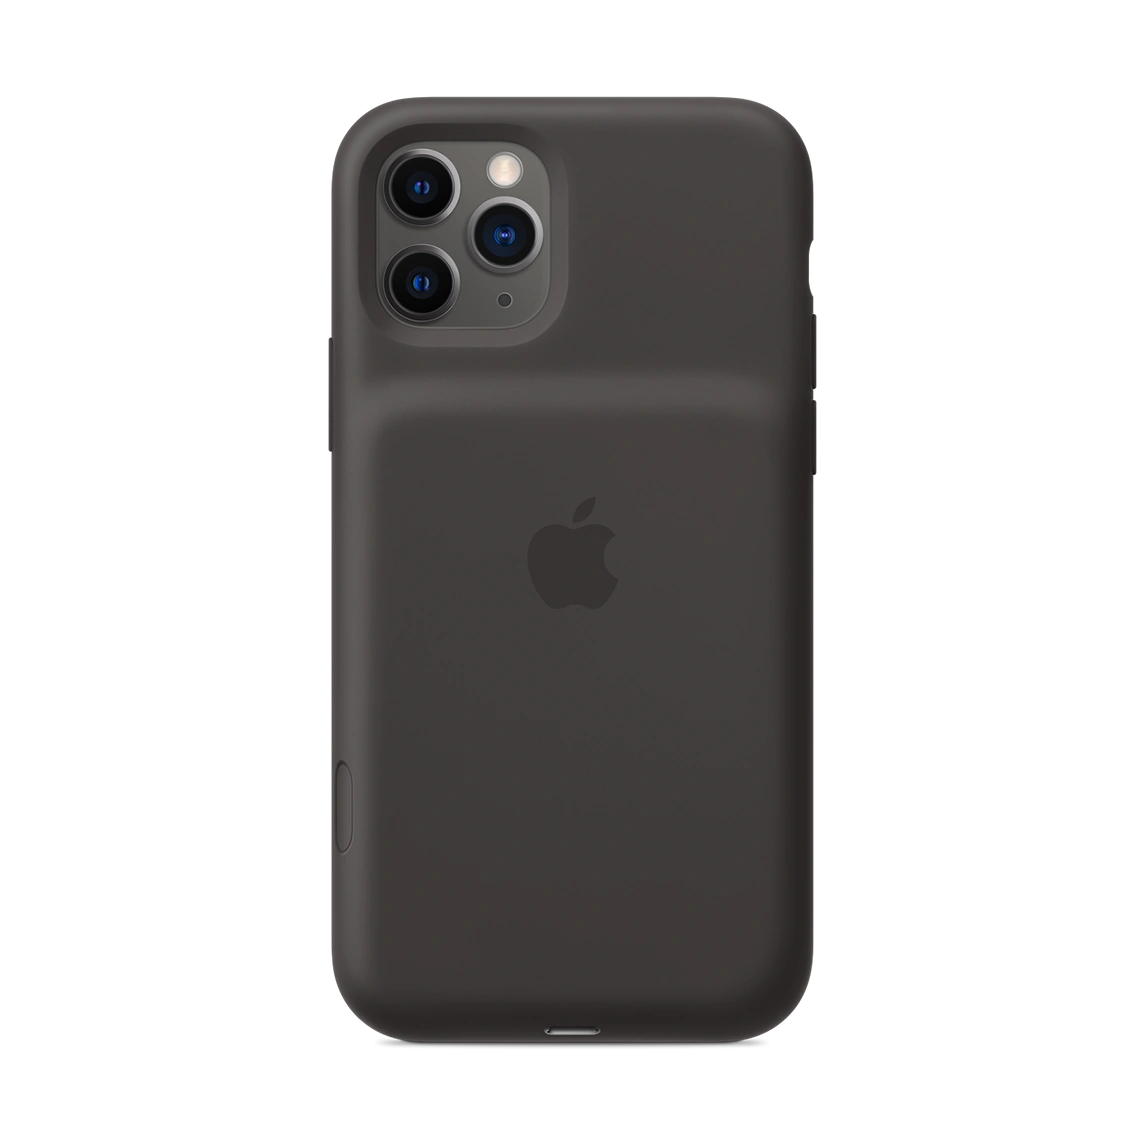 apple-iphone-11-pro-max-smart-battery-case